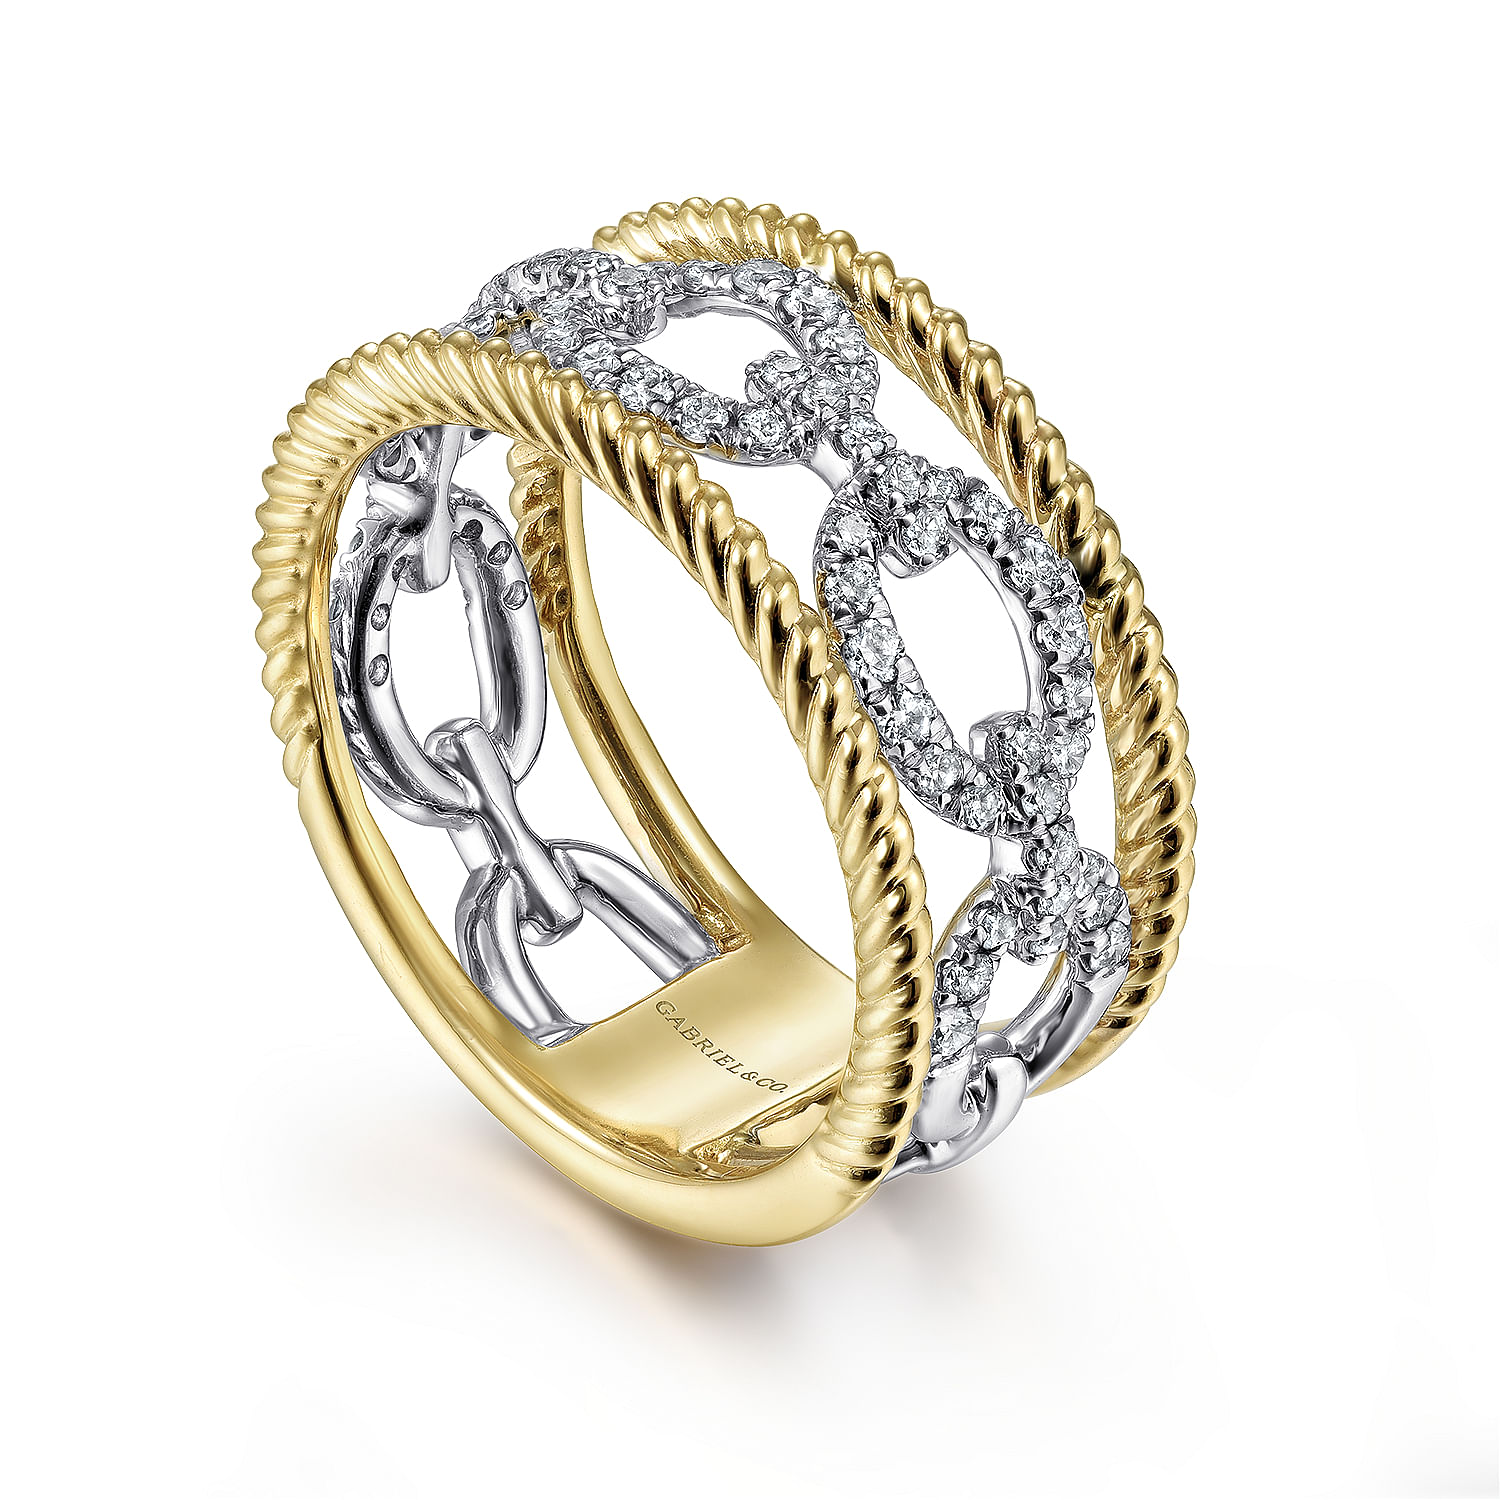 14K White-Yellow Gold Diamond Link and Twisted Rope Ring